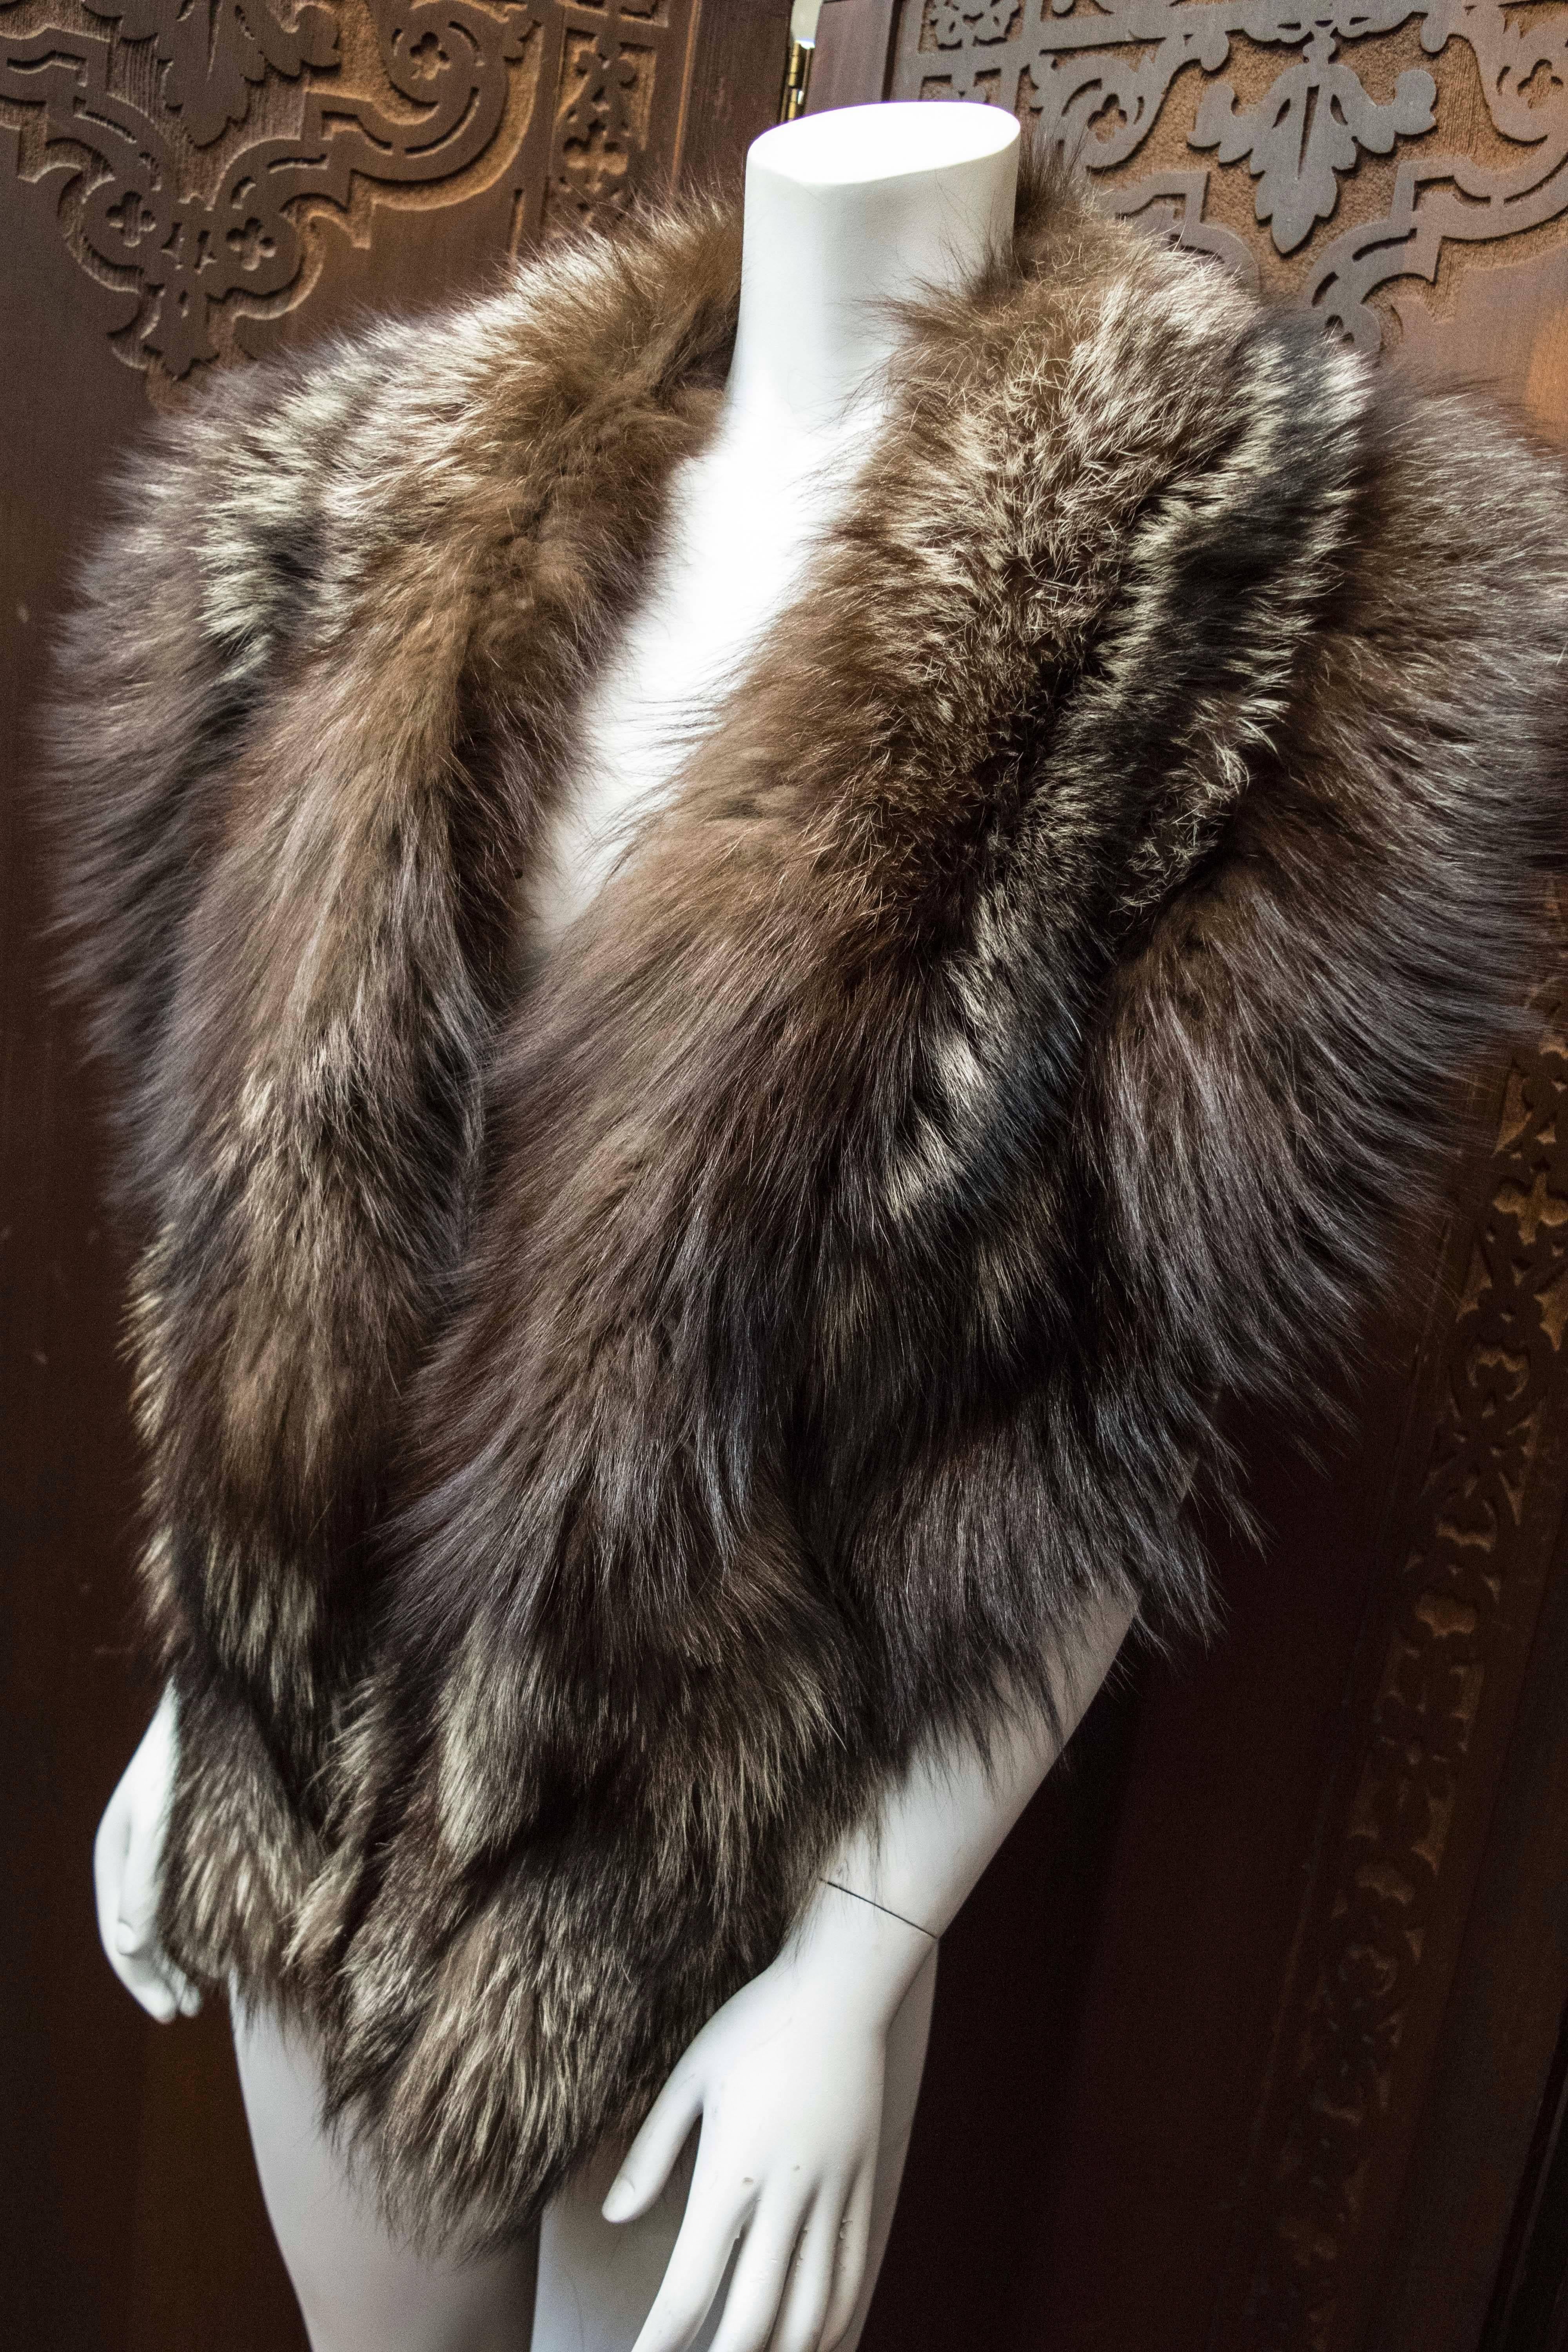 Silver Fox Fur Wrap

This luxurious silver Fox fur wrap is soft, long, and fluffy with a stunning lamé lining. The fur has retained it’s supple skin and the underfur, guard hairs remain soft, dense, and fluffy. The piece has fur clasps in the